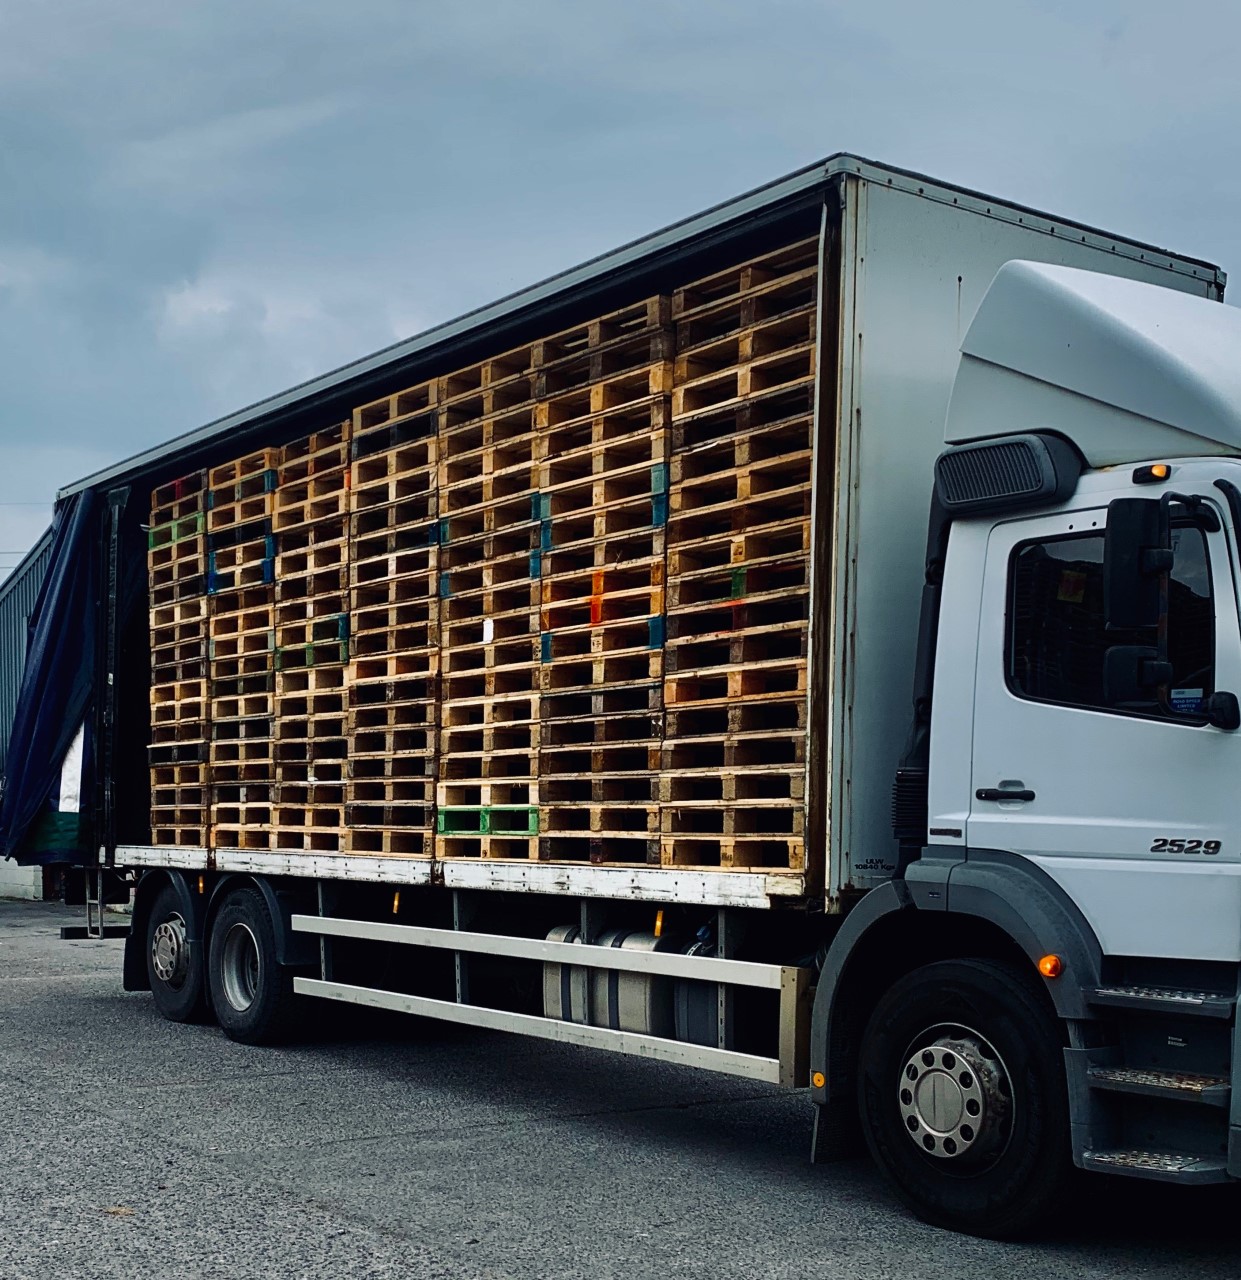 Lorry with Pallets